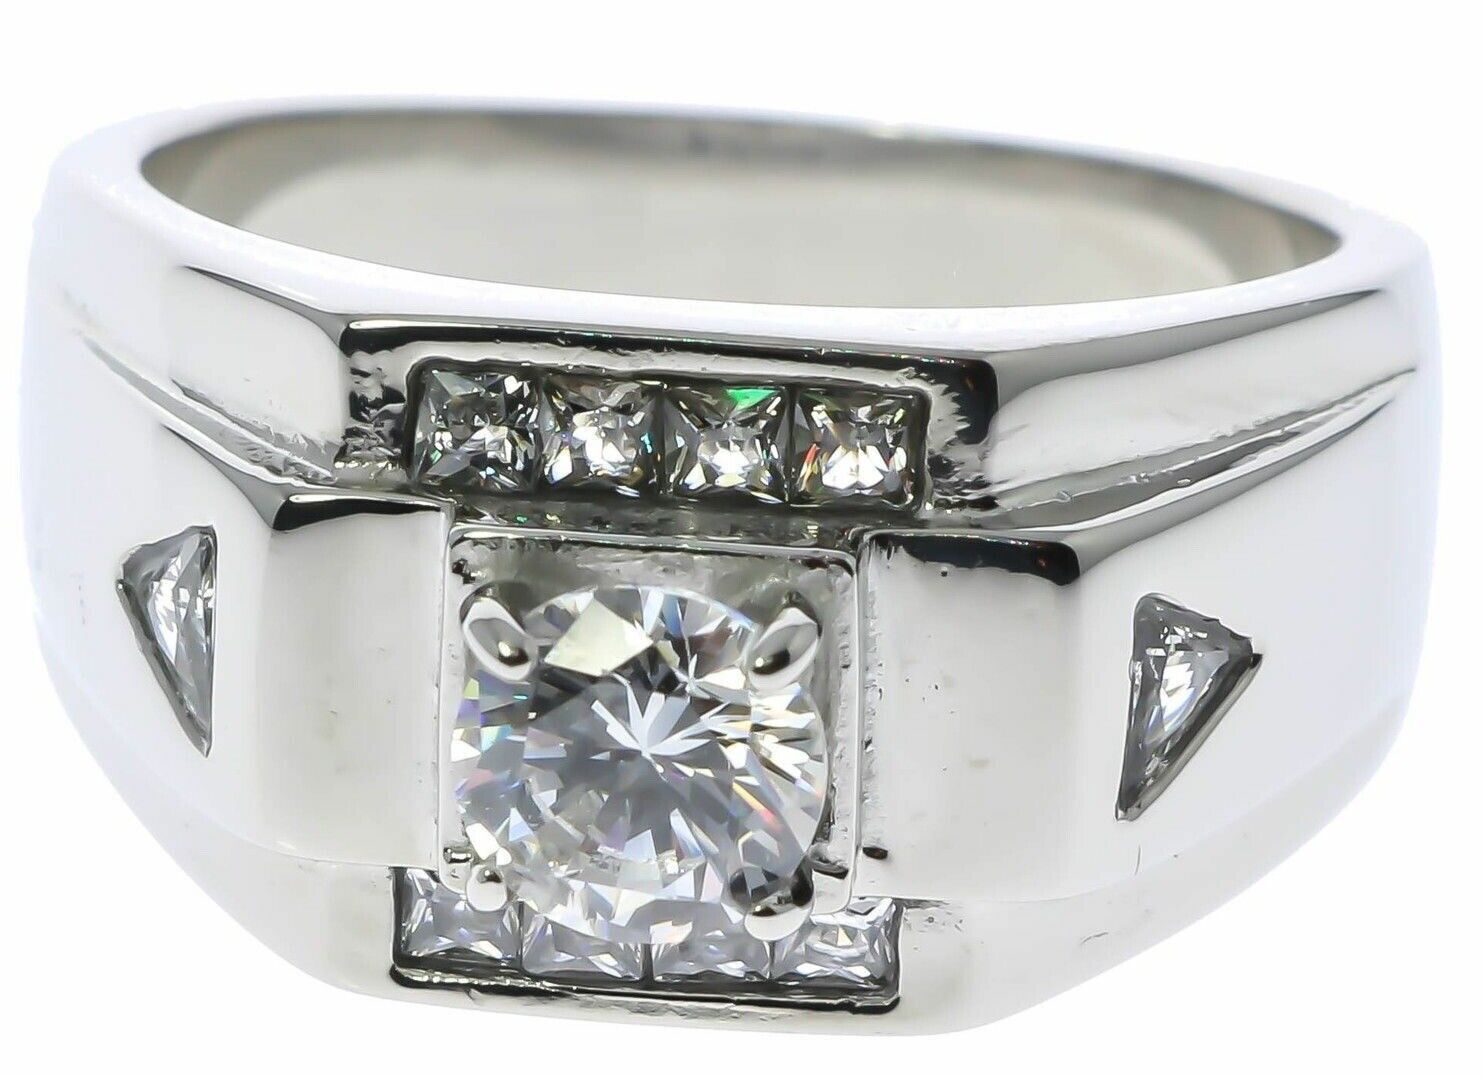 Details about  / 2 carat weight Cz Triangle enhanced Stainless Steel Men/'s Ring Size 13 T45